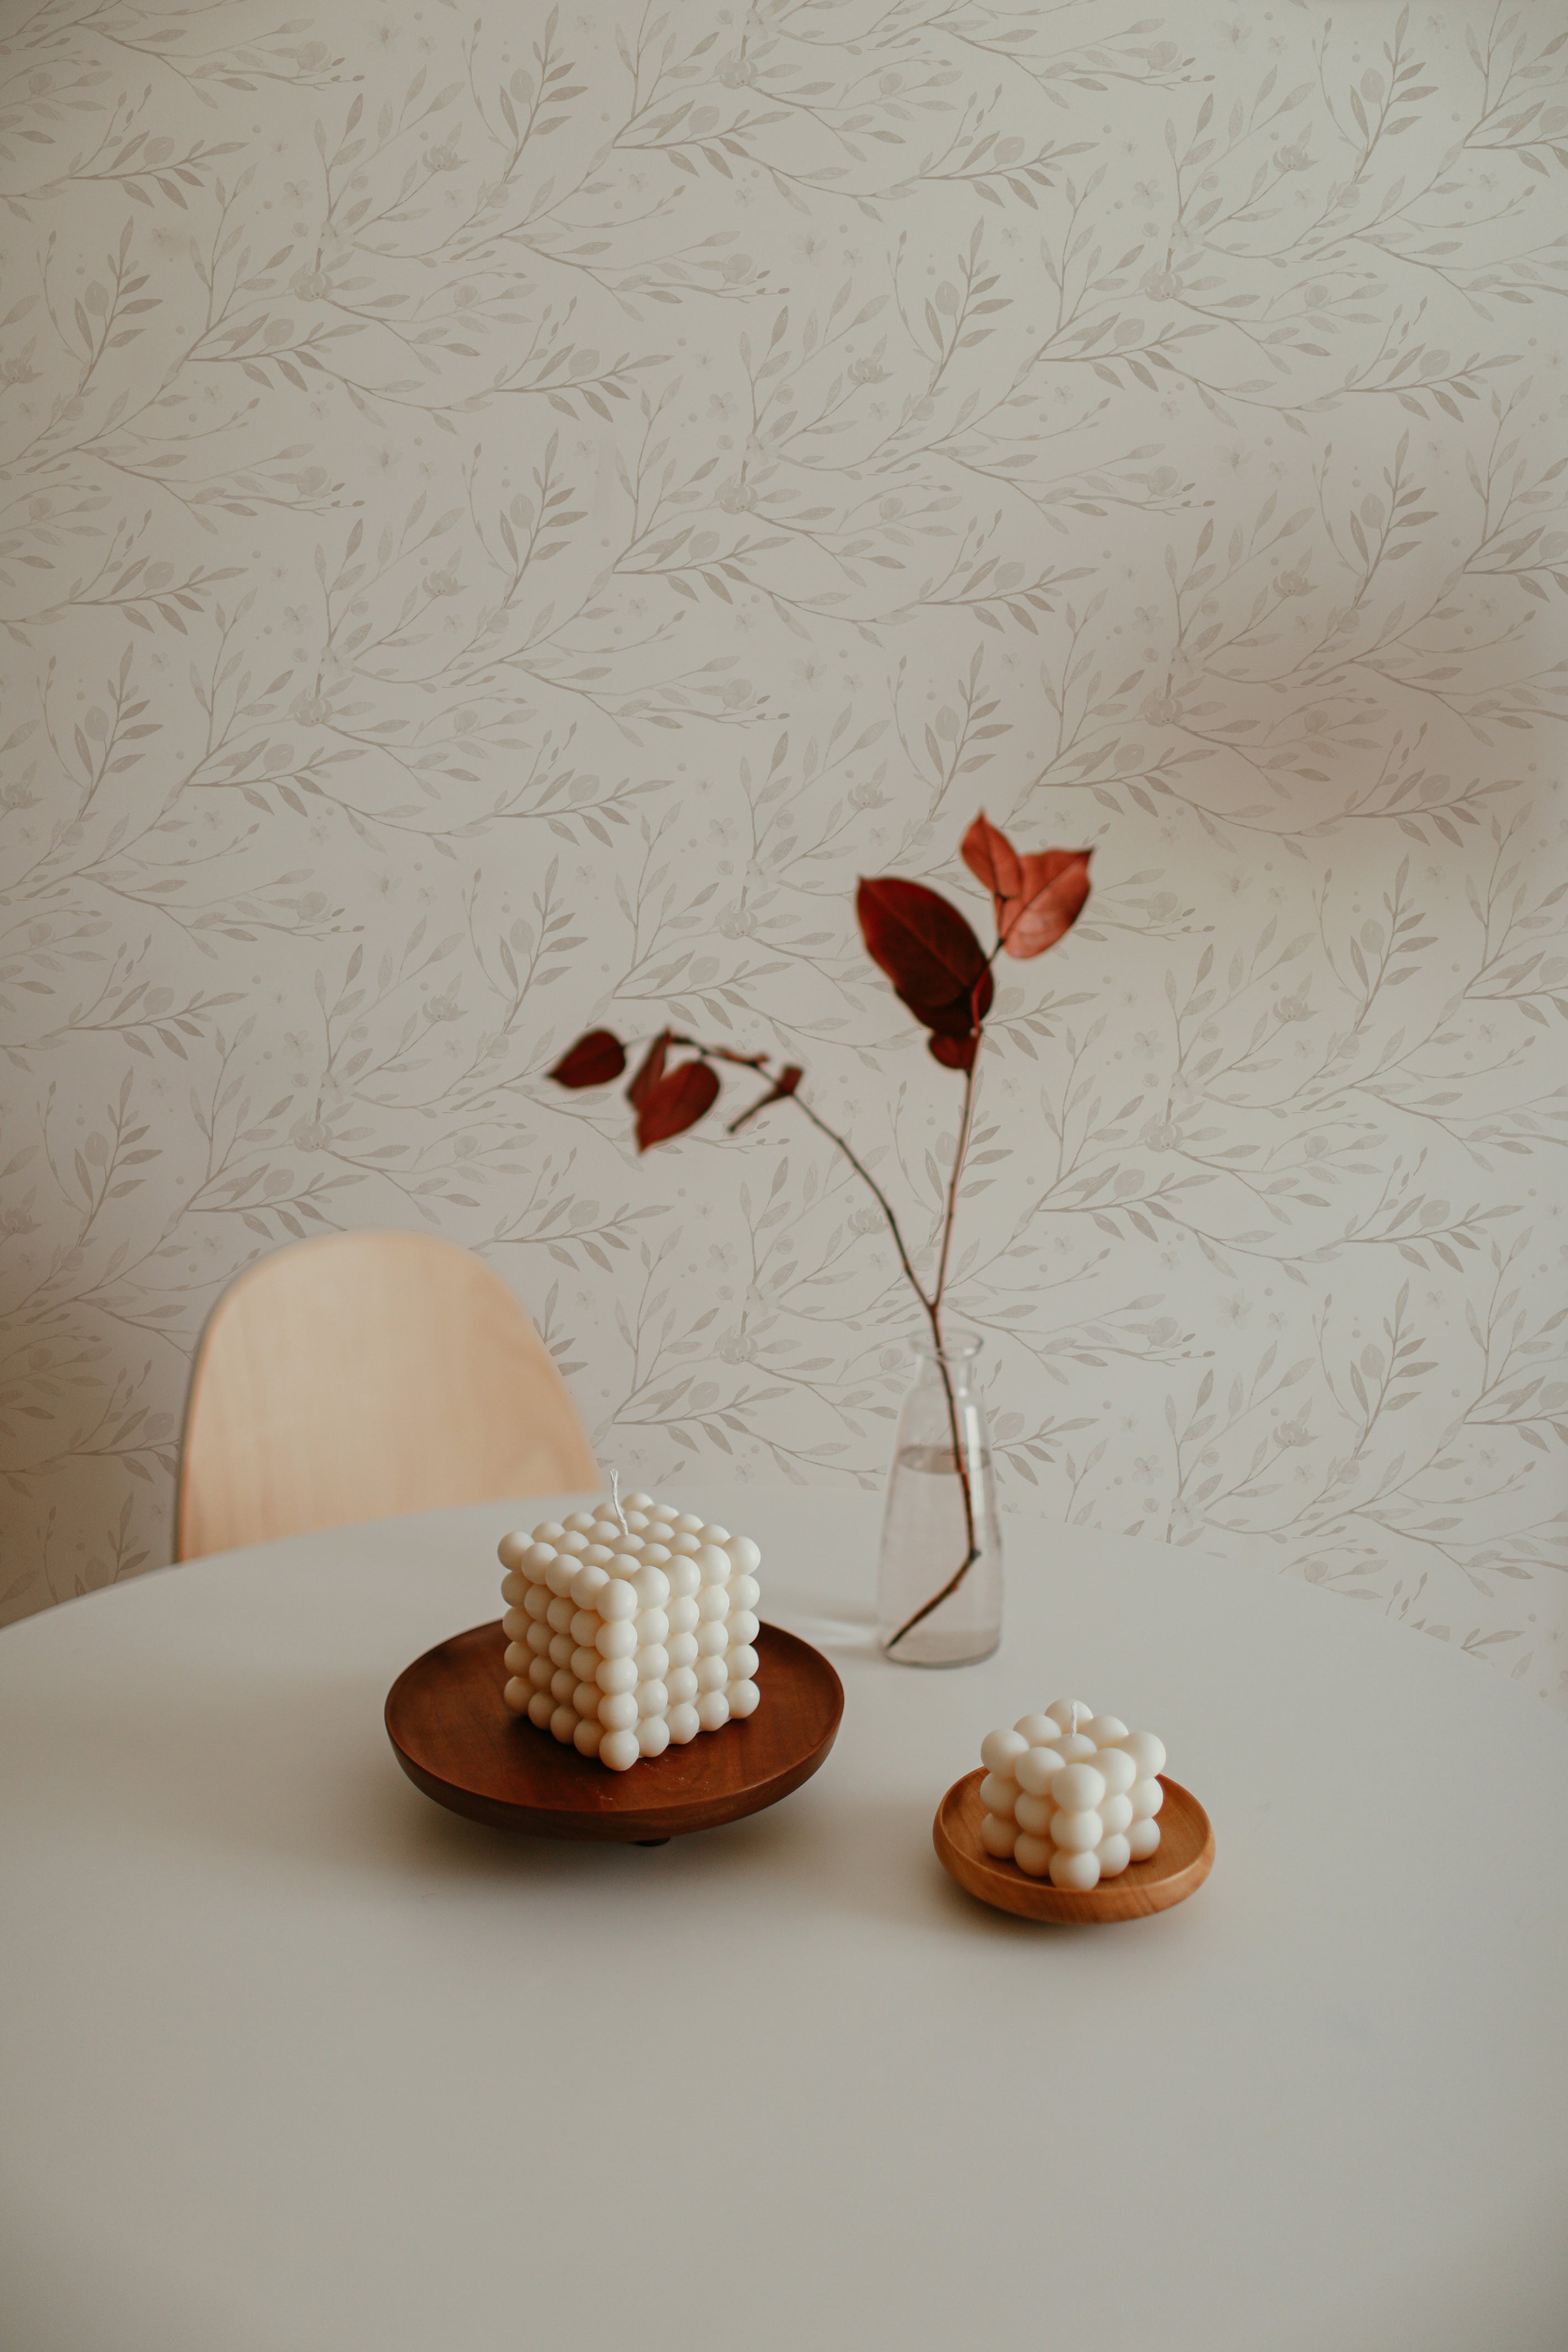 A minimalist table setting featuring a unique bubble candle against a backdrop of 'Spring Bird' wallpaper with delicate branches and leaves